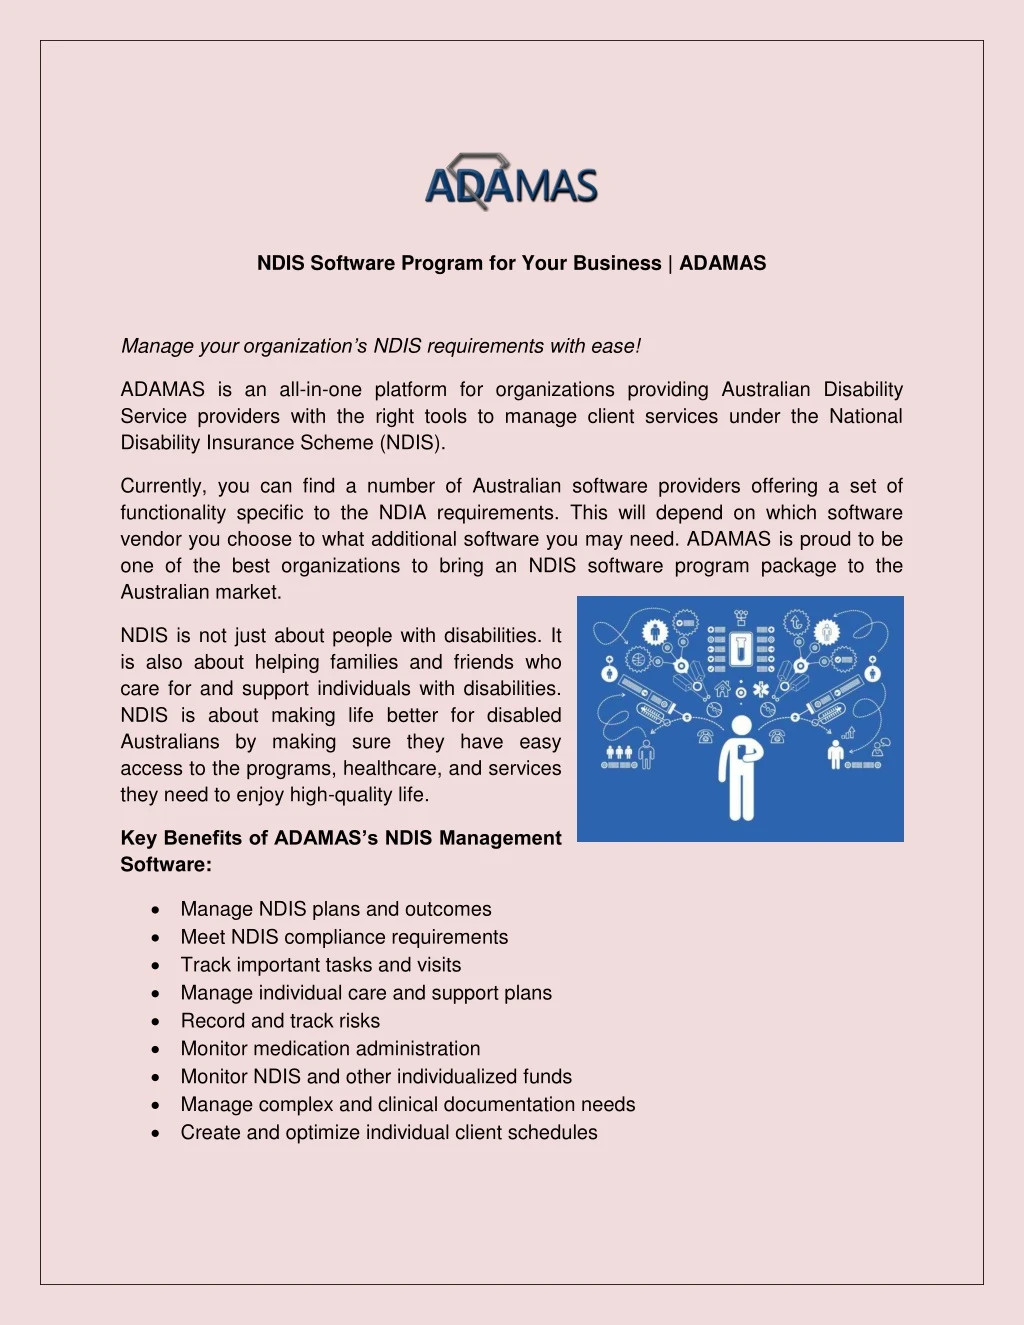 ndis software program for your business adamas